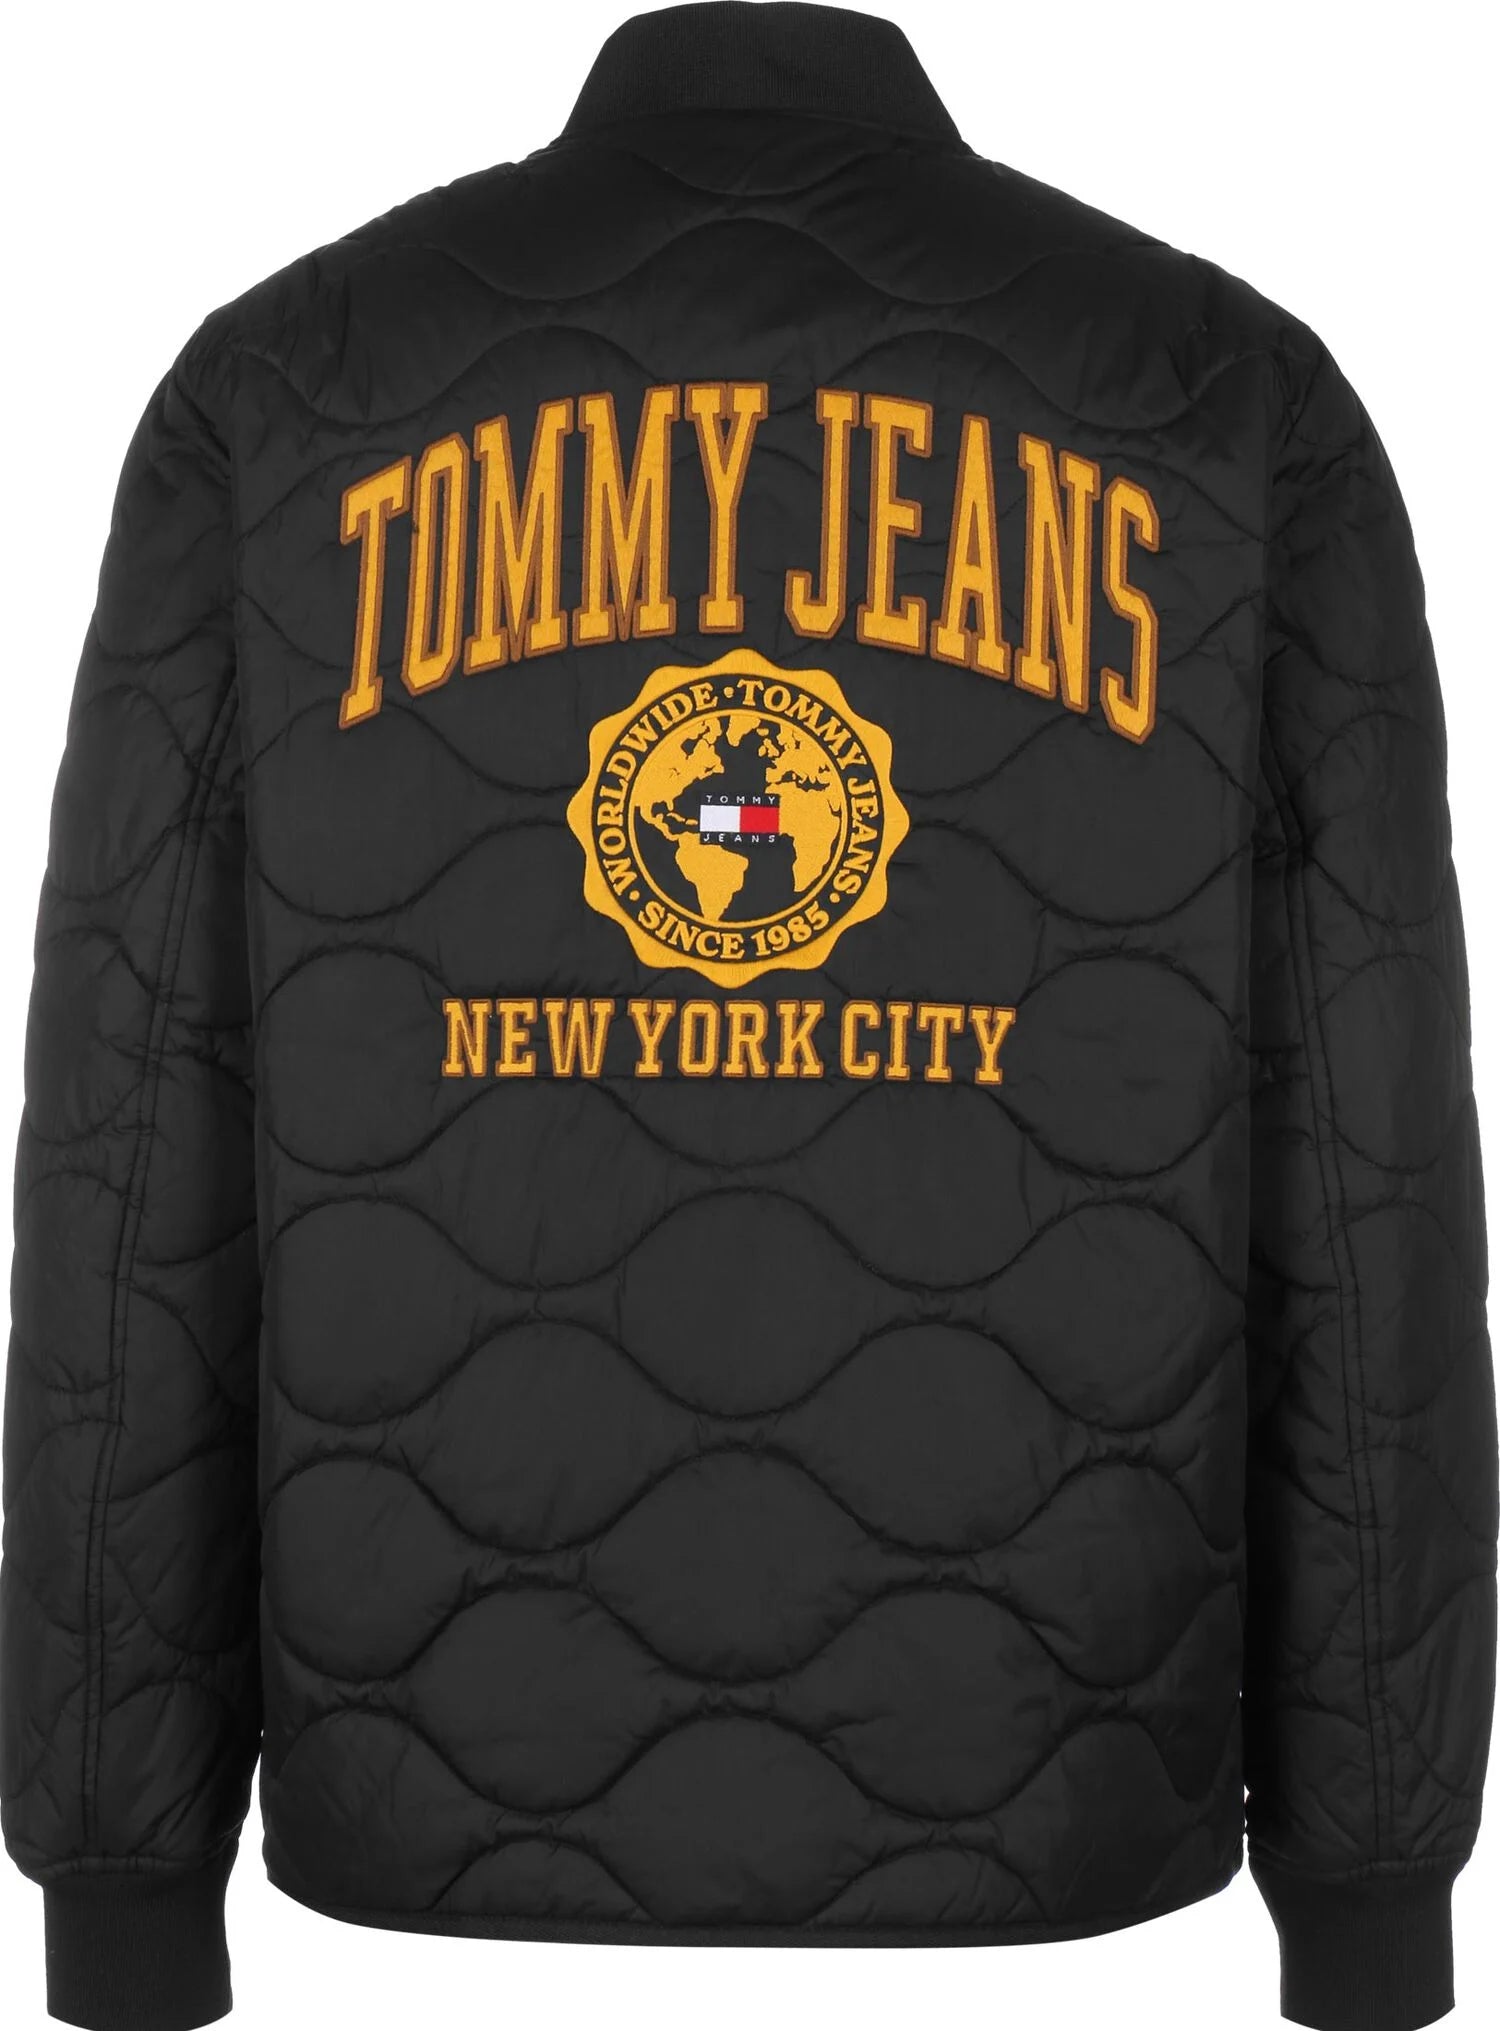 Tommy Jeans - Collegiate Quilted Jacket - Black